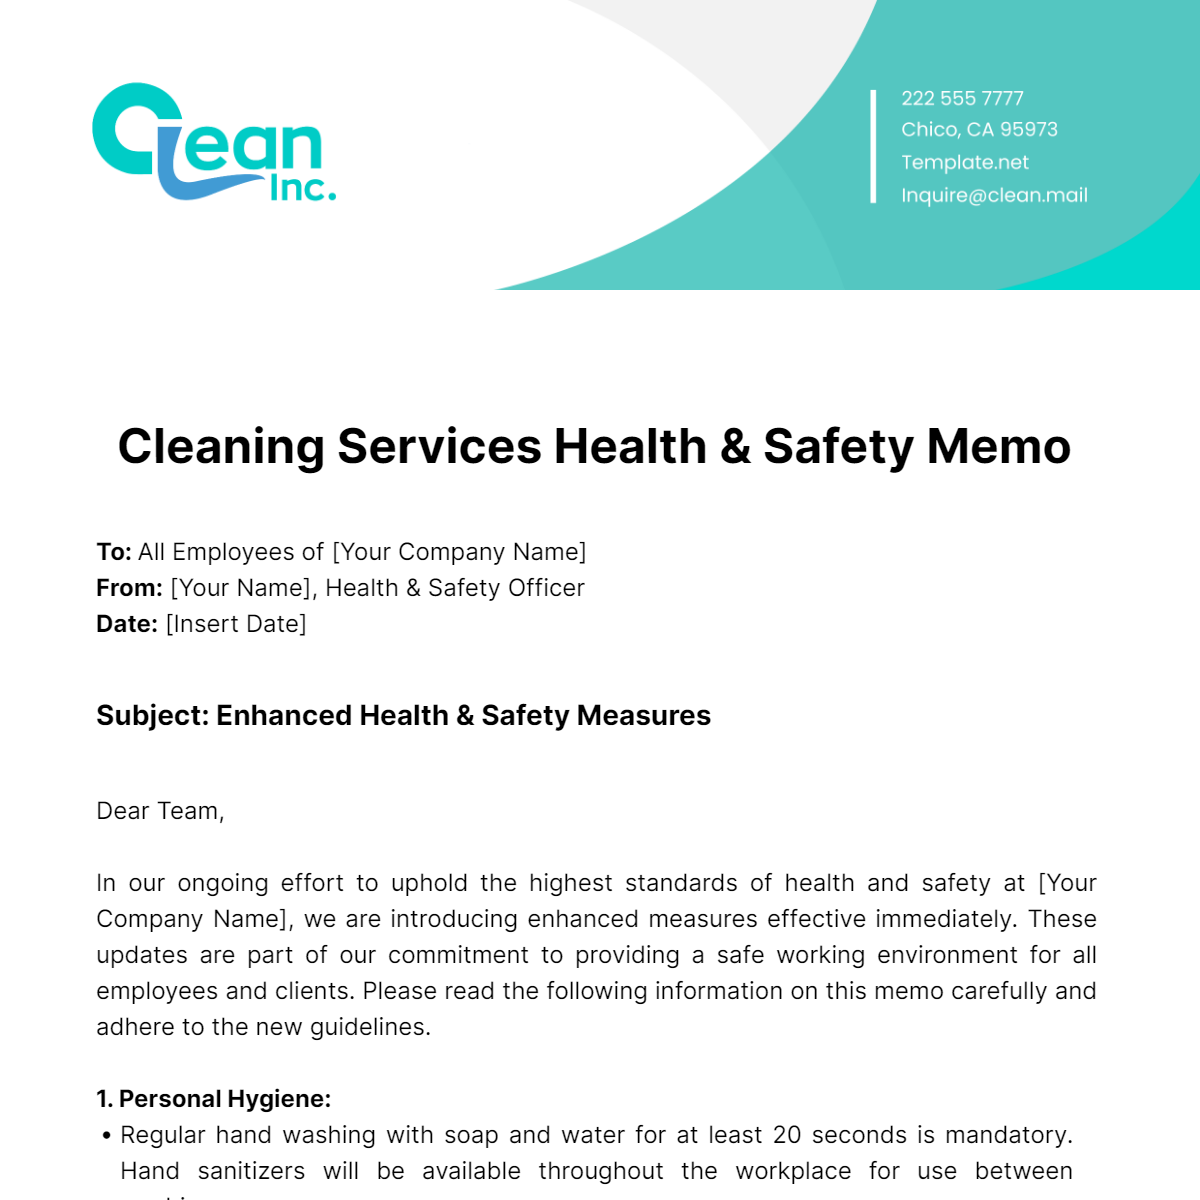 Free Cleaning Services Health & Safety Memo Template